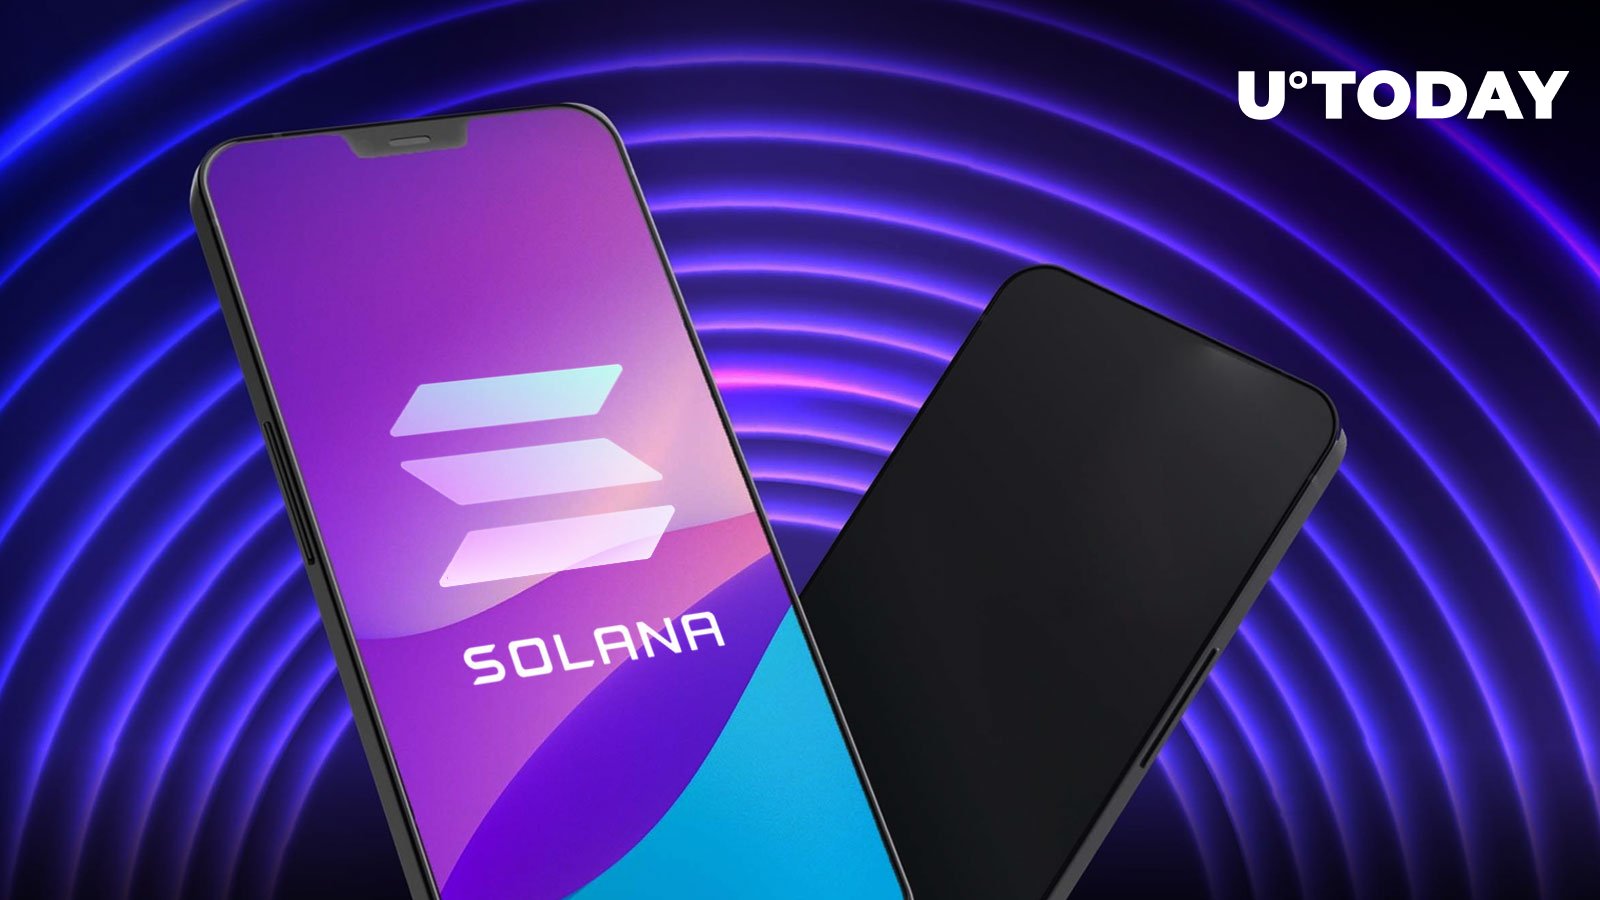 Solana’s New Smartphone off to Strong Start